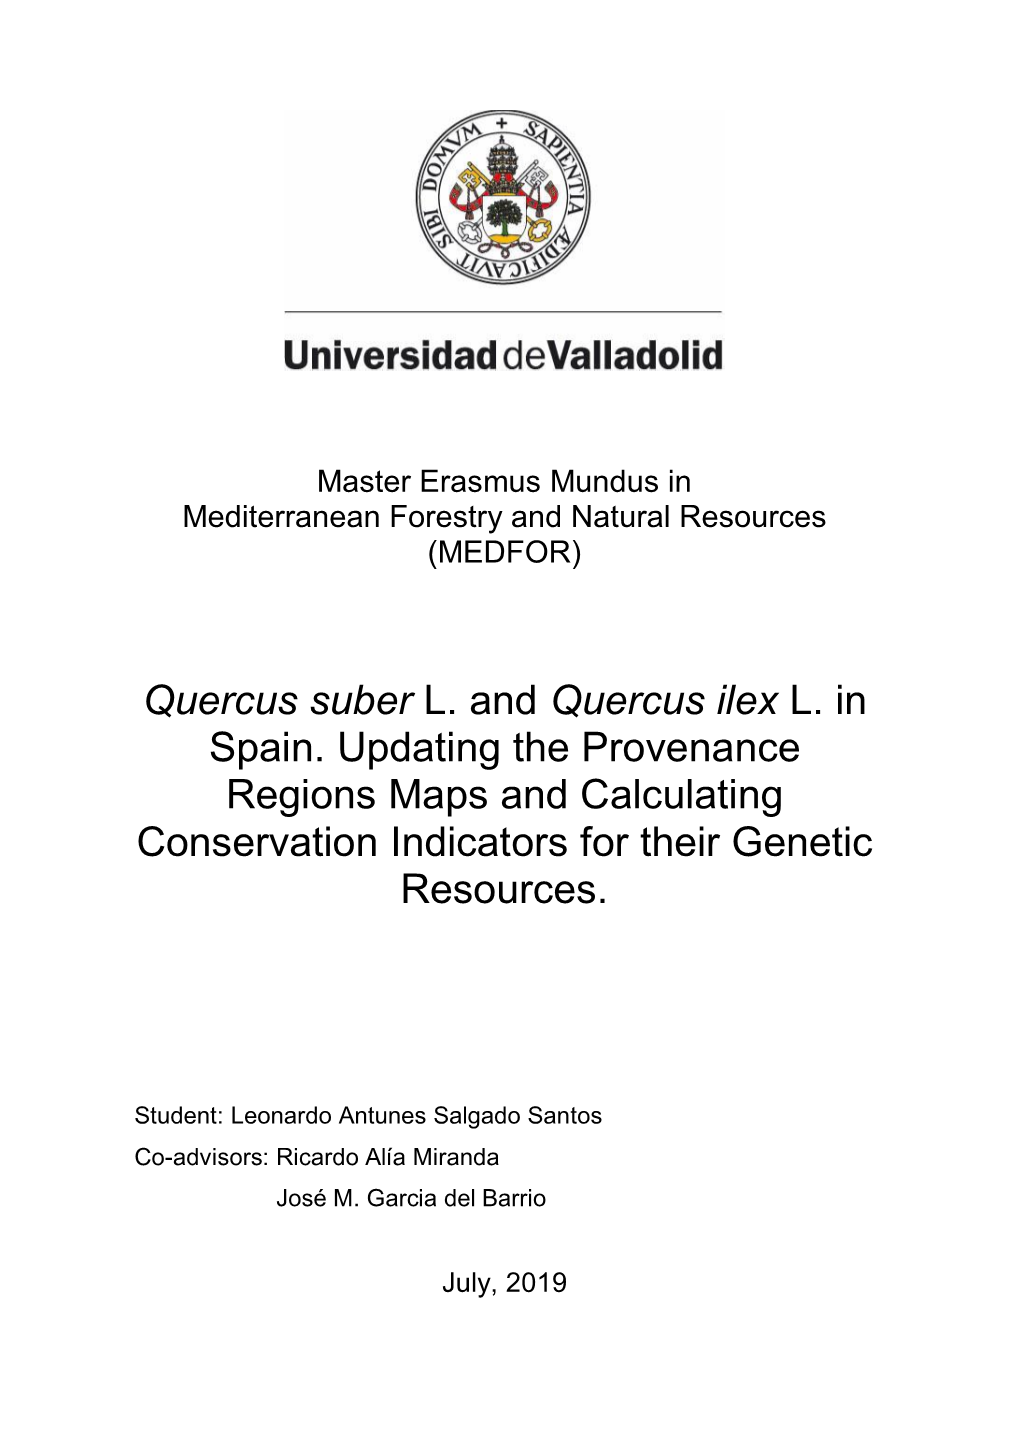 Quercus Suber L. and Quercus Ilex L. in Spain. Updating the Provenance Regions Maps and Calculating Conservation Indicators for Their Genetic Resources